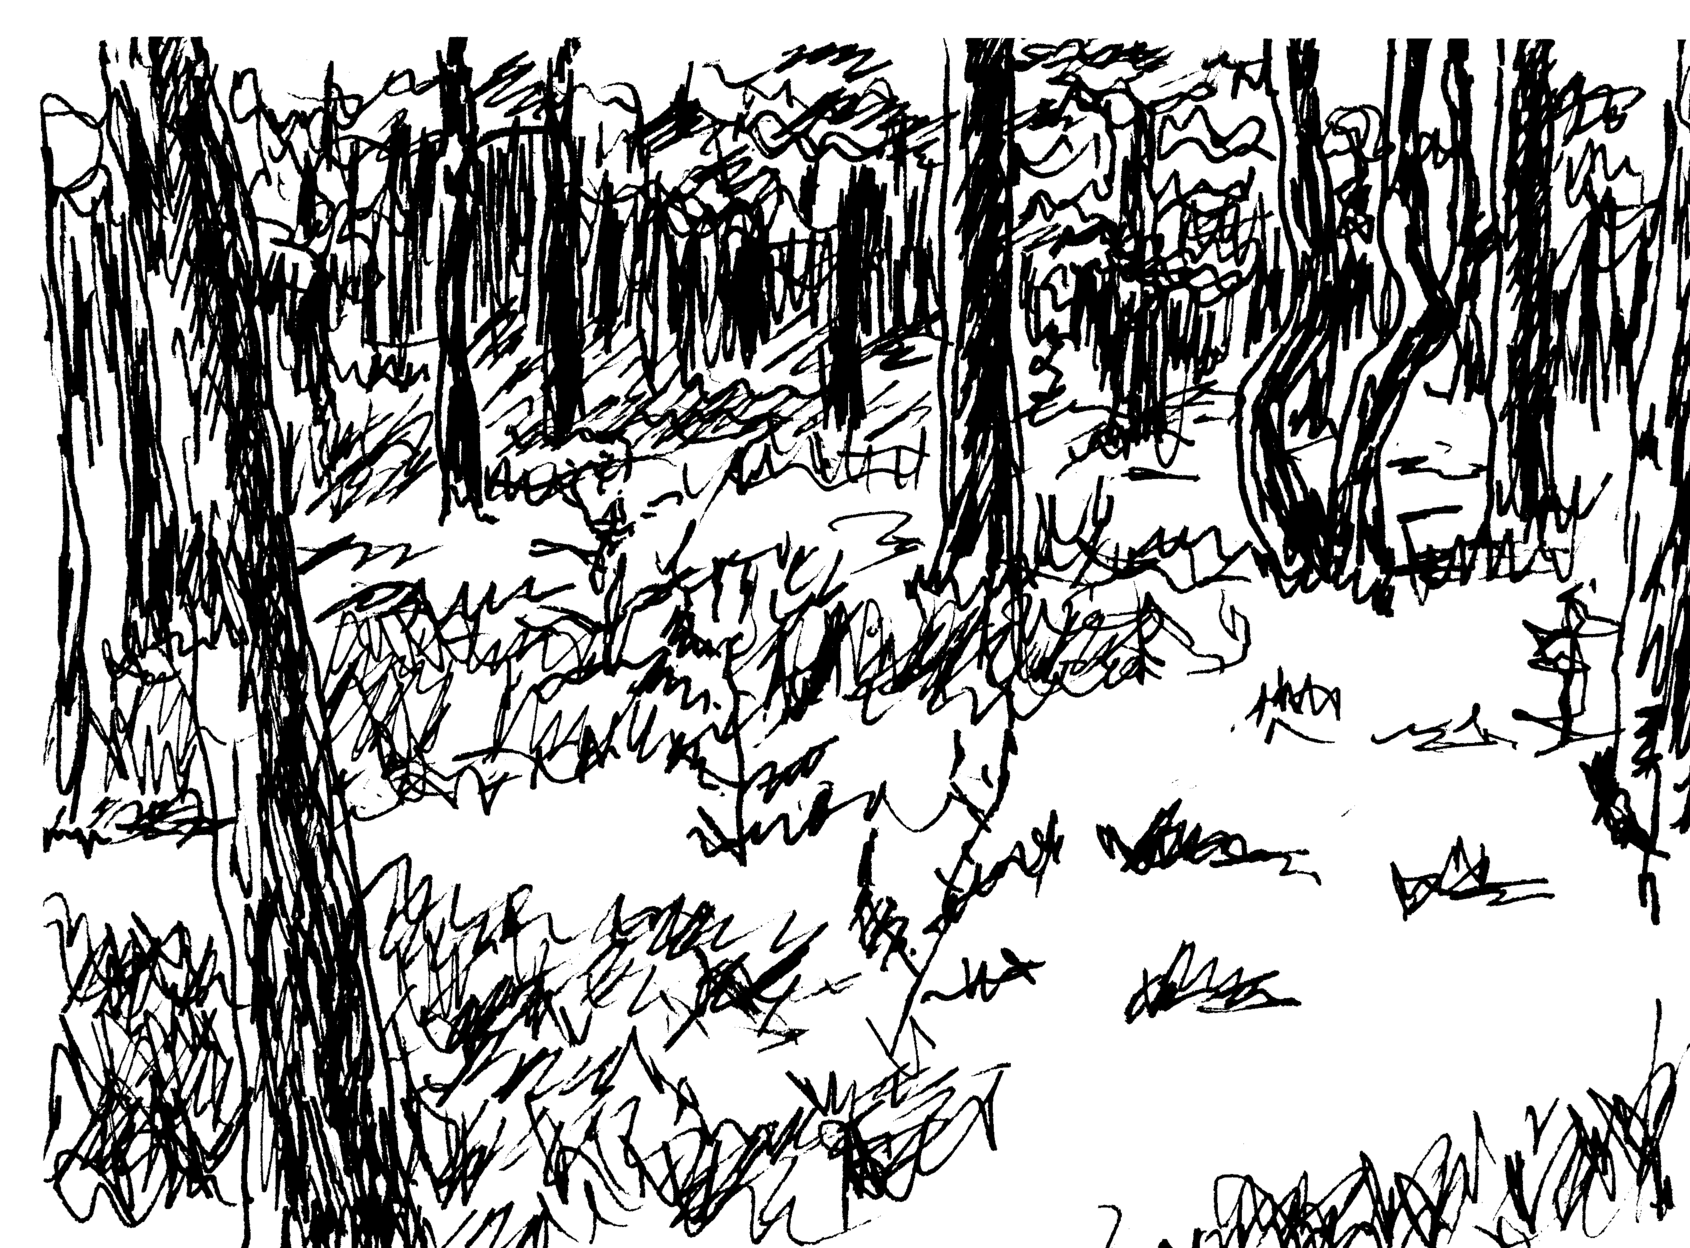 An ink drawing of pines trees in forest.